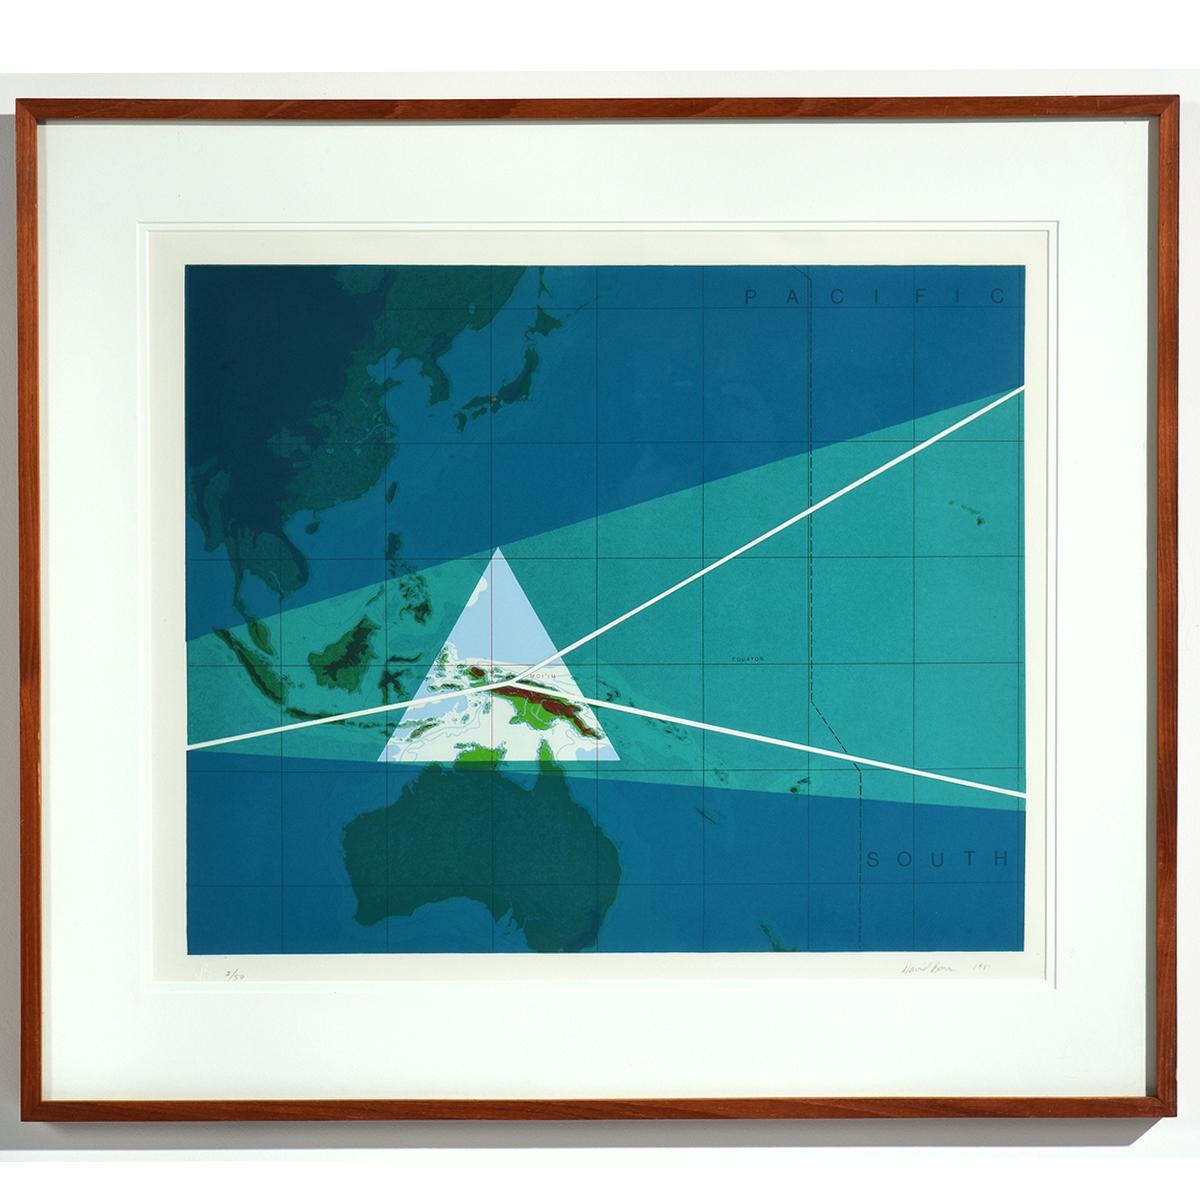 David Barr Landscape Print - "Four Corners Project" Mathematical Geography and Global Art Monograph in Blue